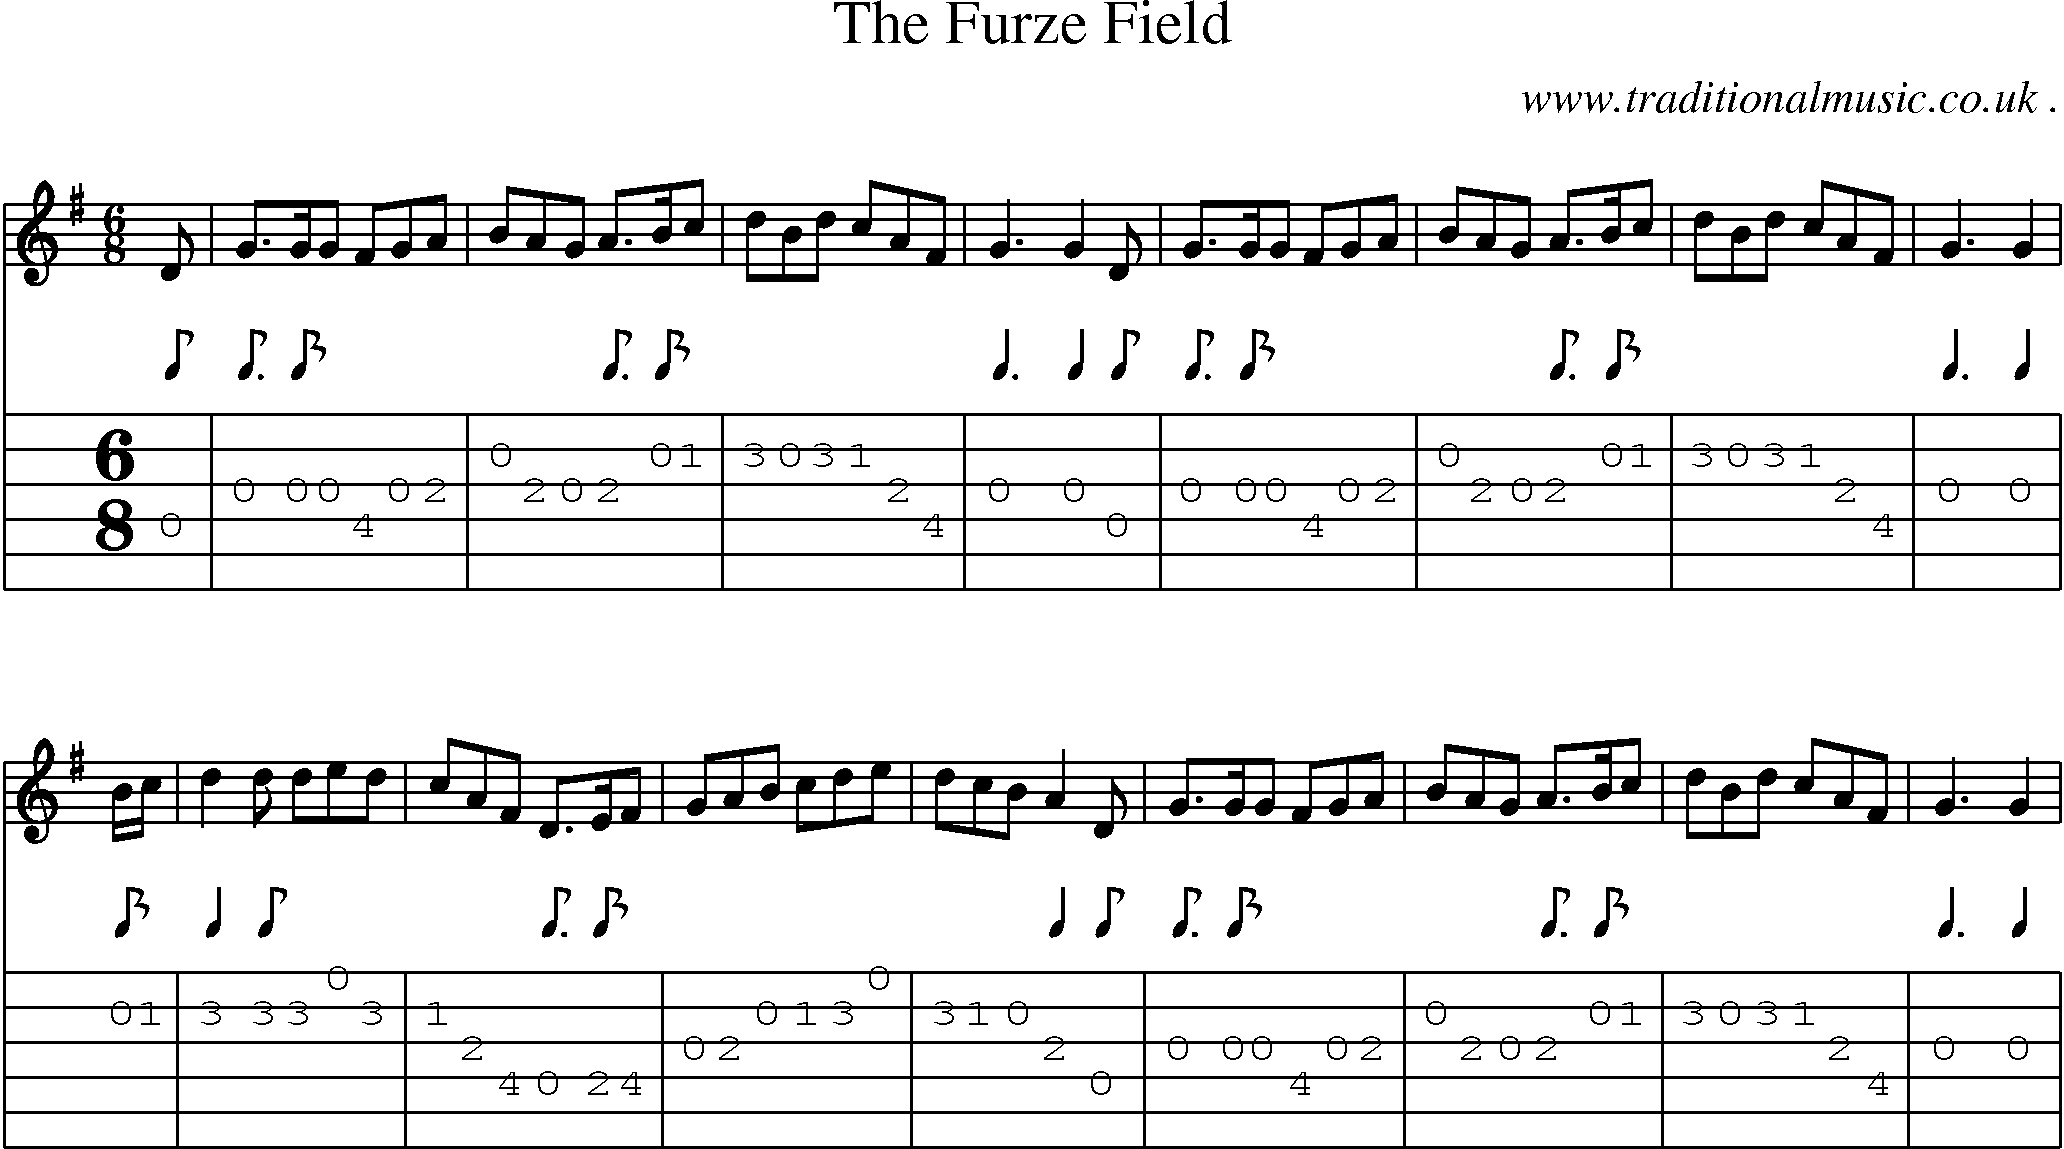 Sheet-Music and Guitar Tabs for The Furze Field